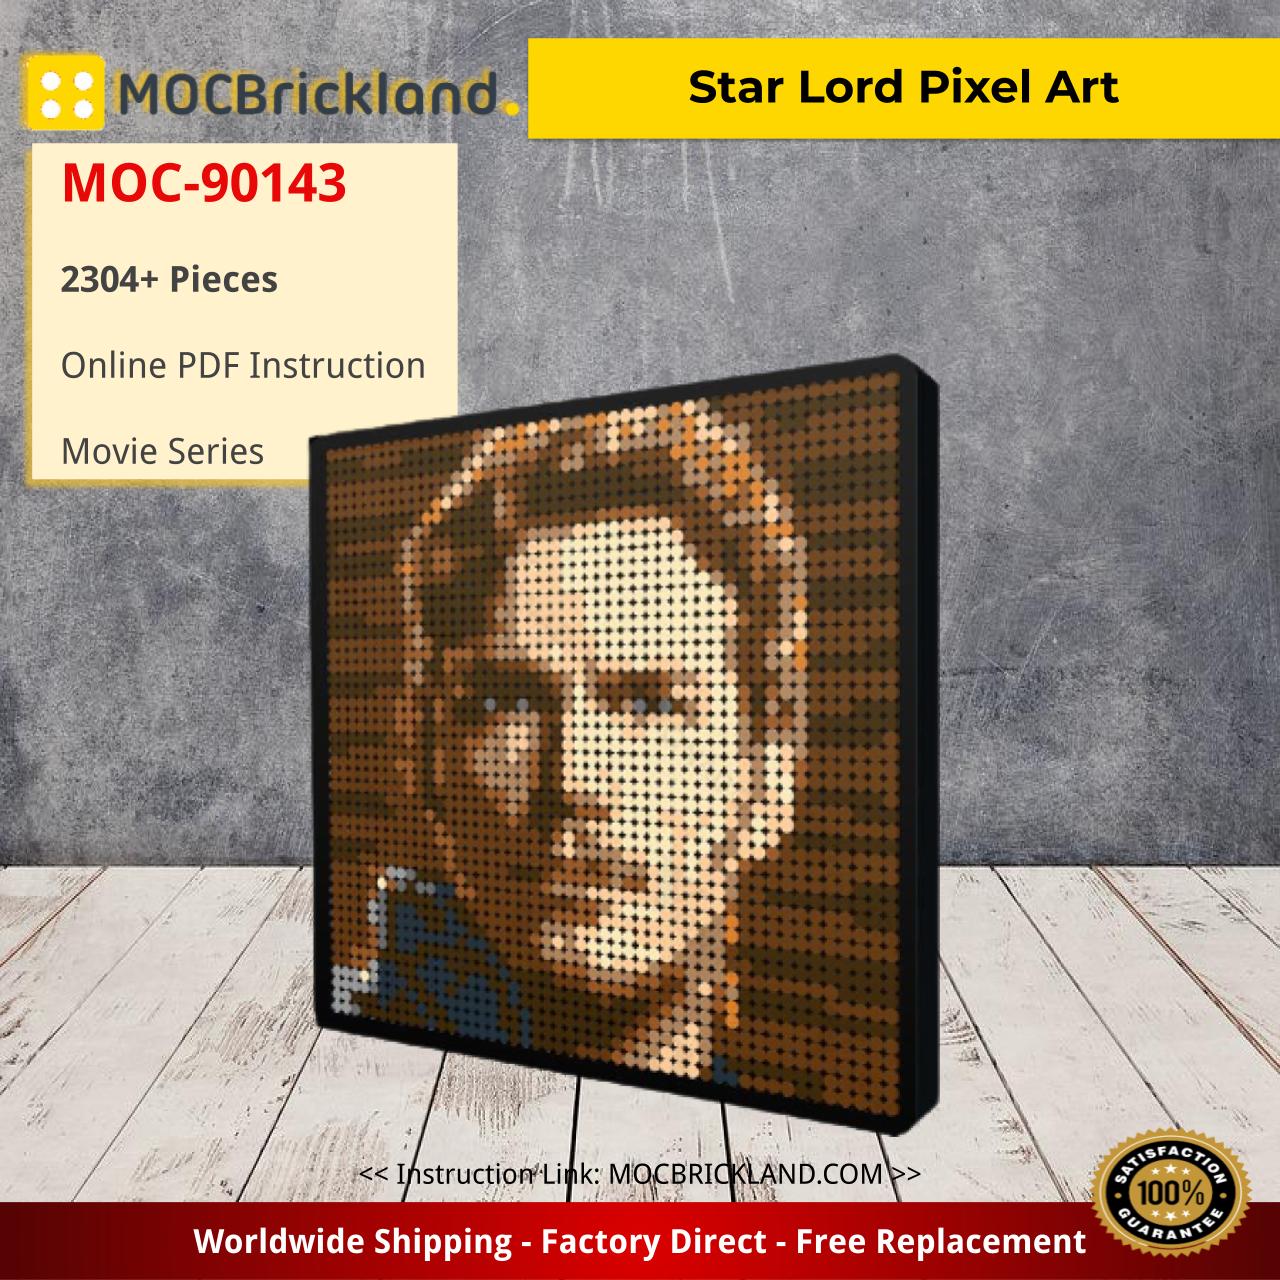 Star Lord Pixel Art Movie MOC-90143 with 2304 pieces